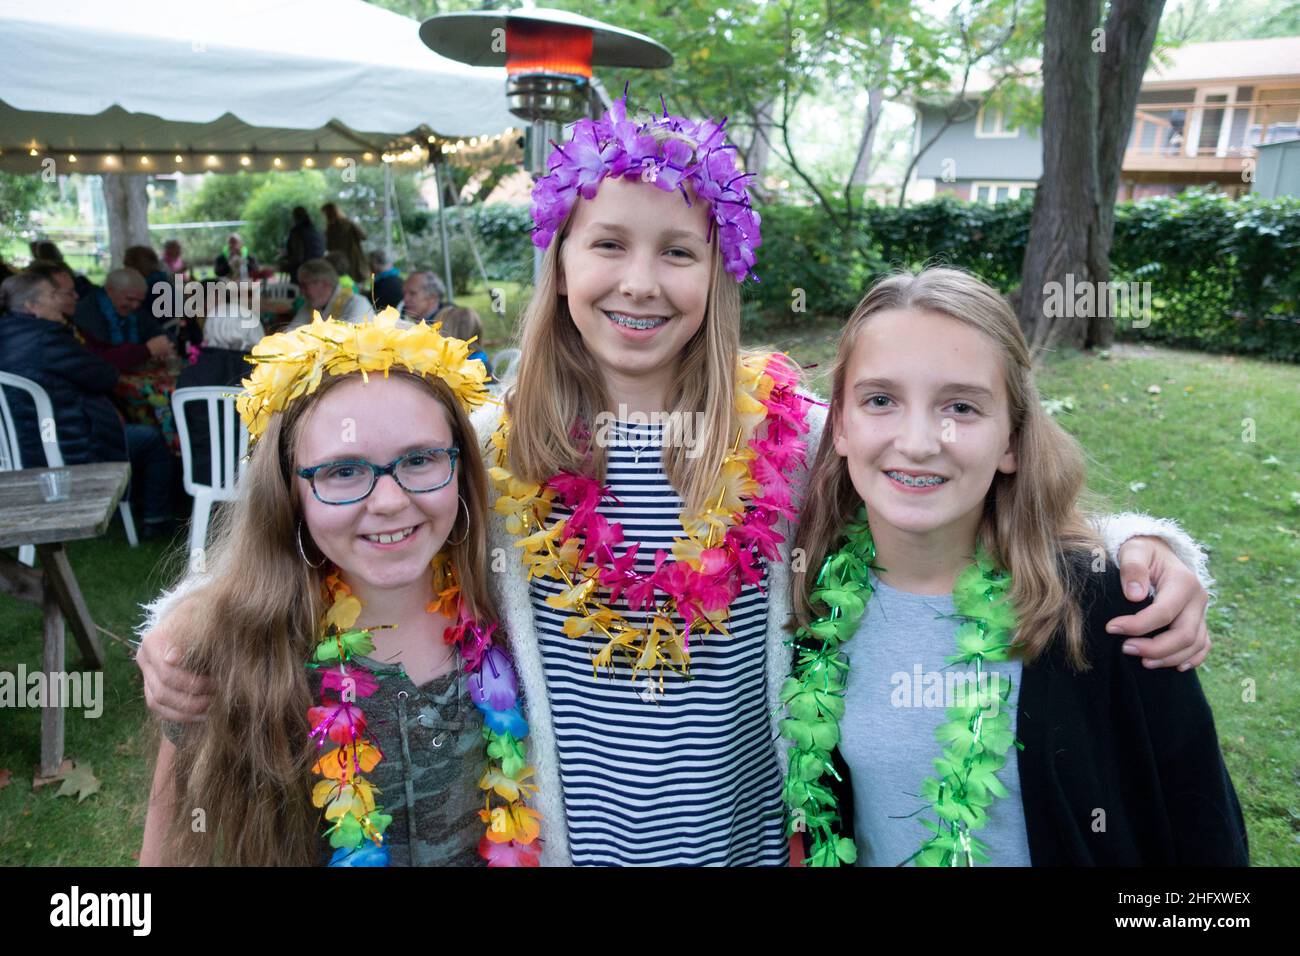 Three cousins wearing colorful leis posing and enjoying grandparent's anniversary party held in their backyard. Minneapolis Minnesota MN USA Stock Photo